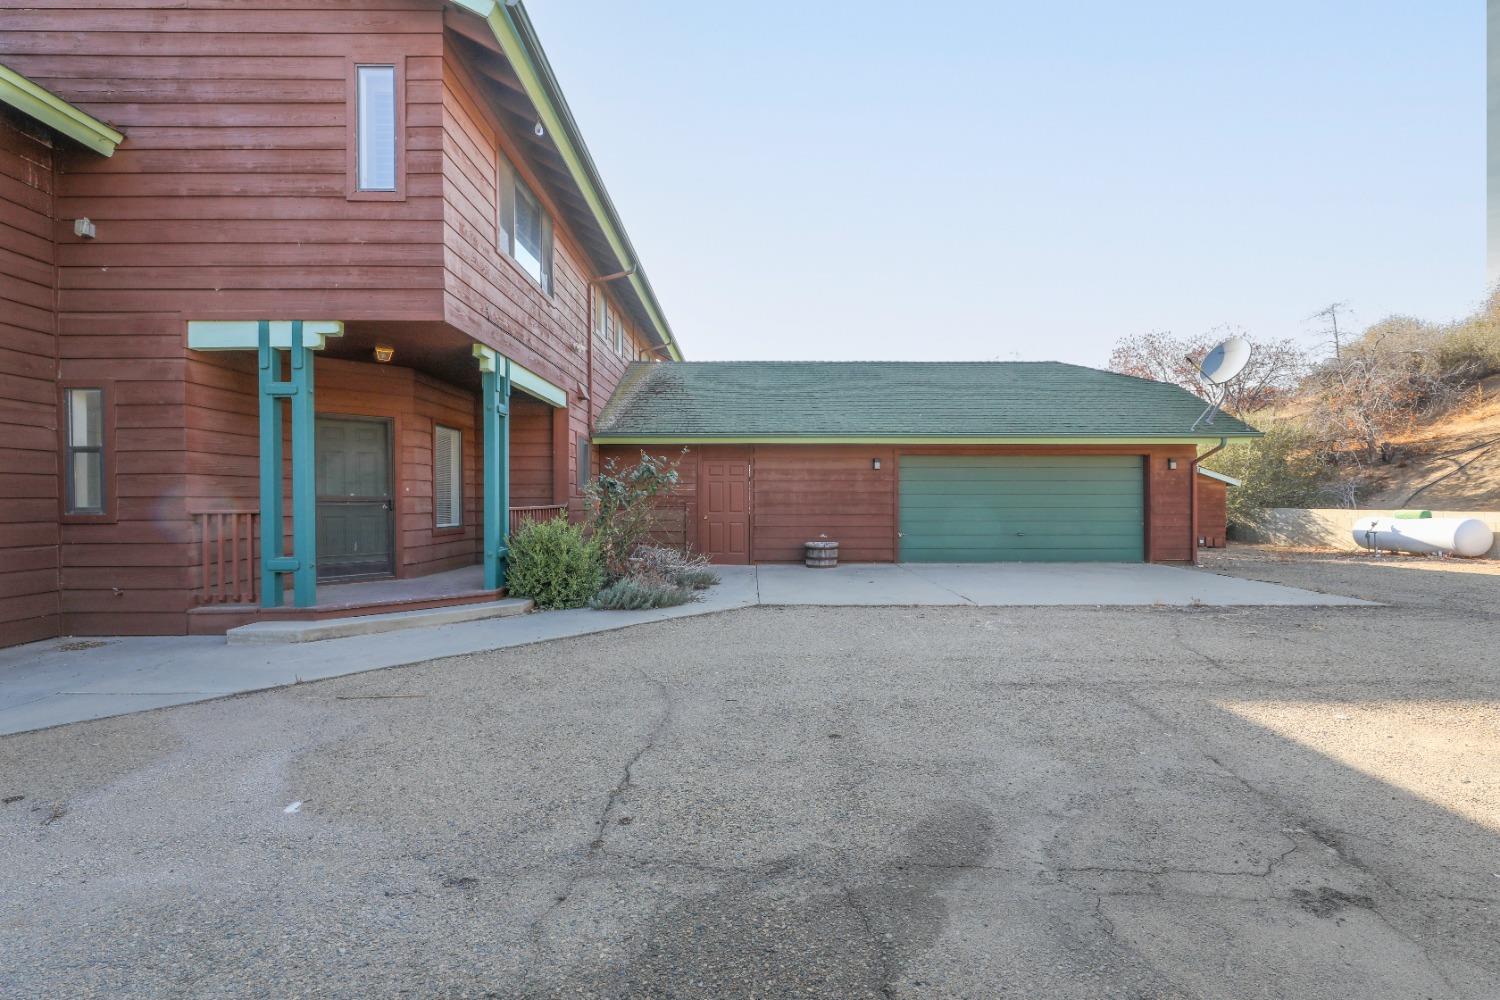 49802 Lullaby Lane, Squaw Valley, CA 93675